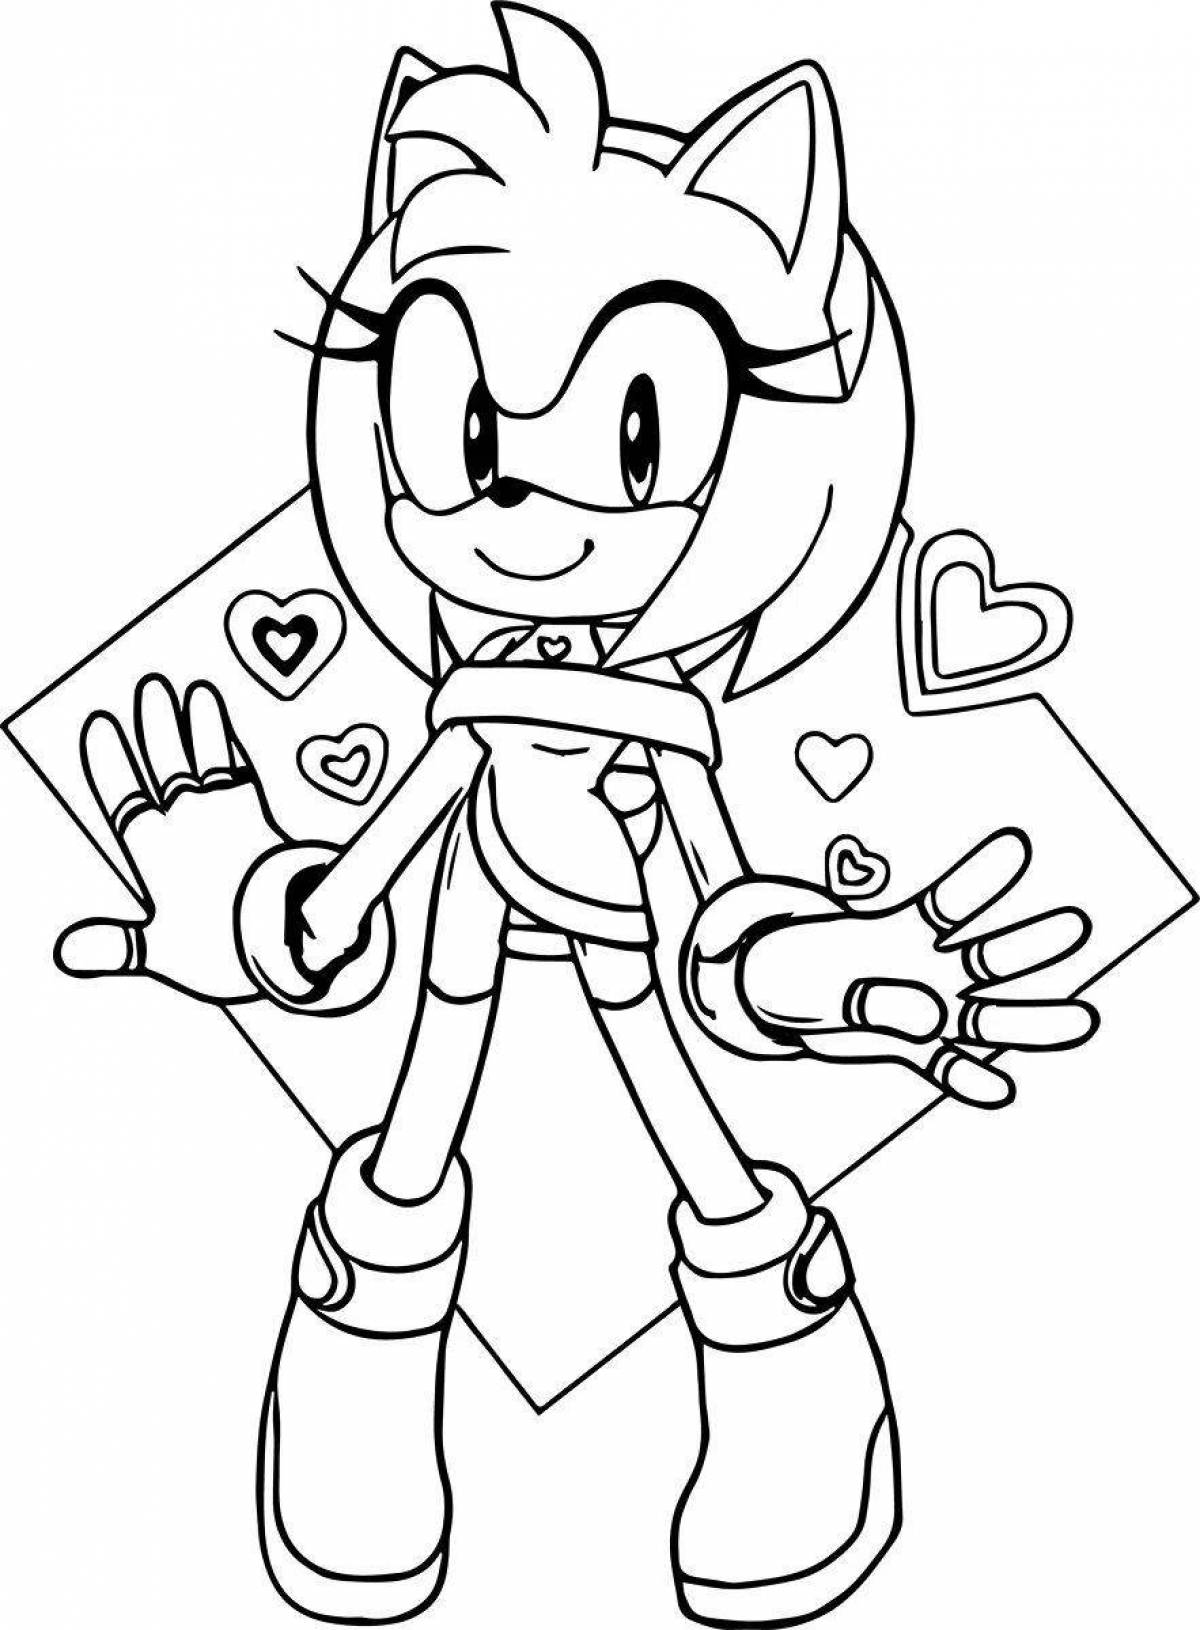 Serene mega sonic coloring page